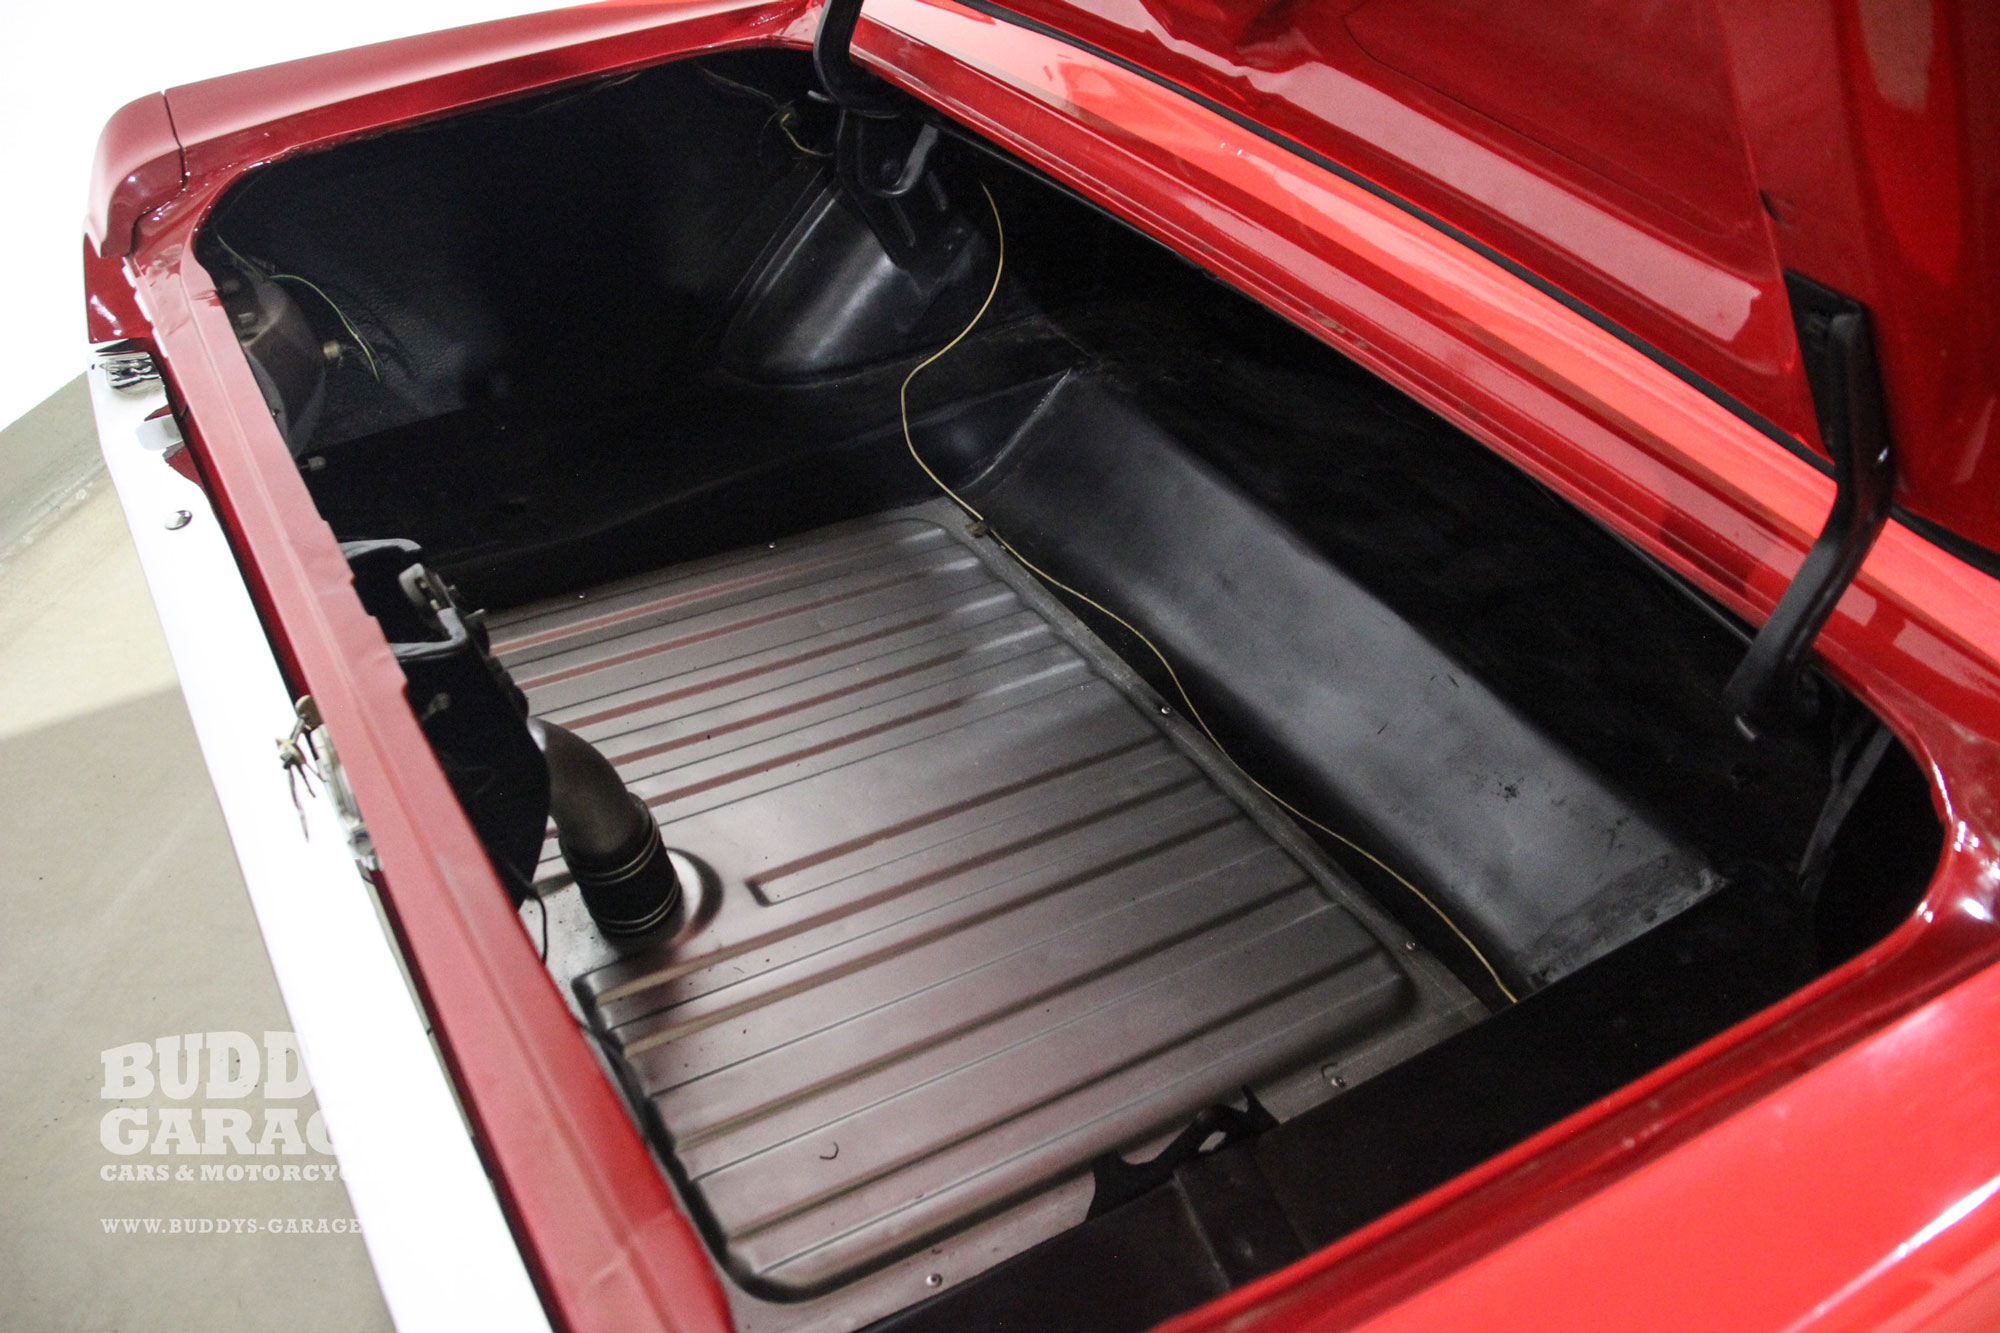 Ford Mustang 1967 rot Candy Apple Red | Buddy's Garage Bad Oeynhausen